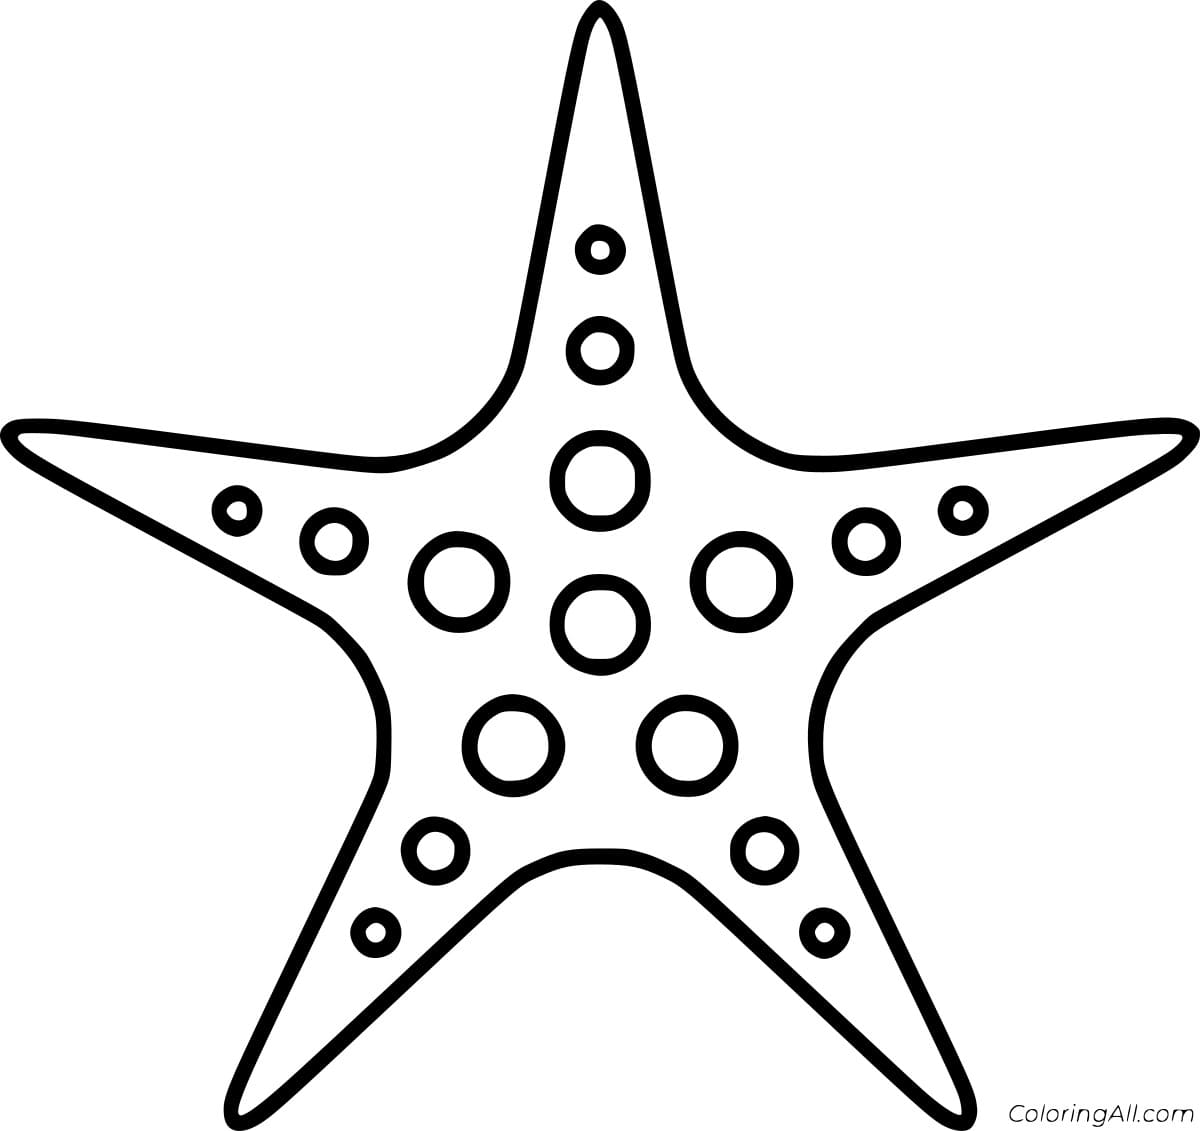 Vermilion Biscuit Sea Star Image Coloring Page